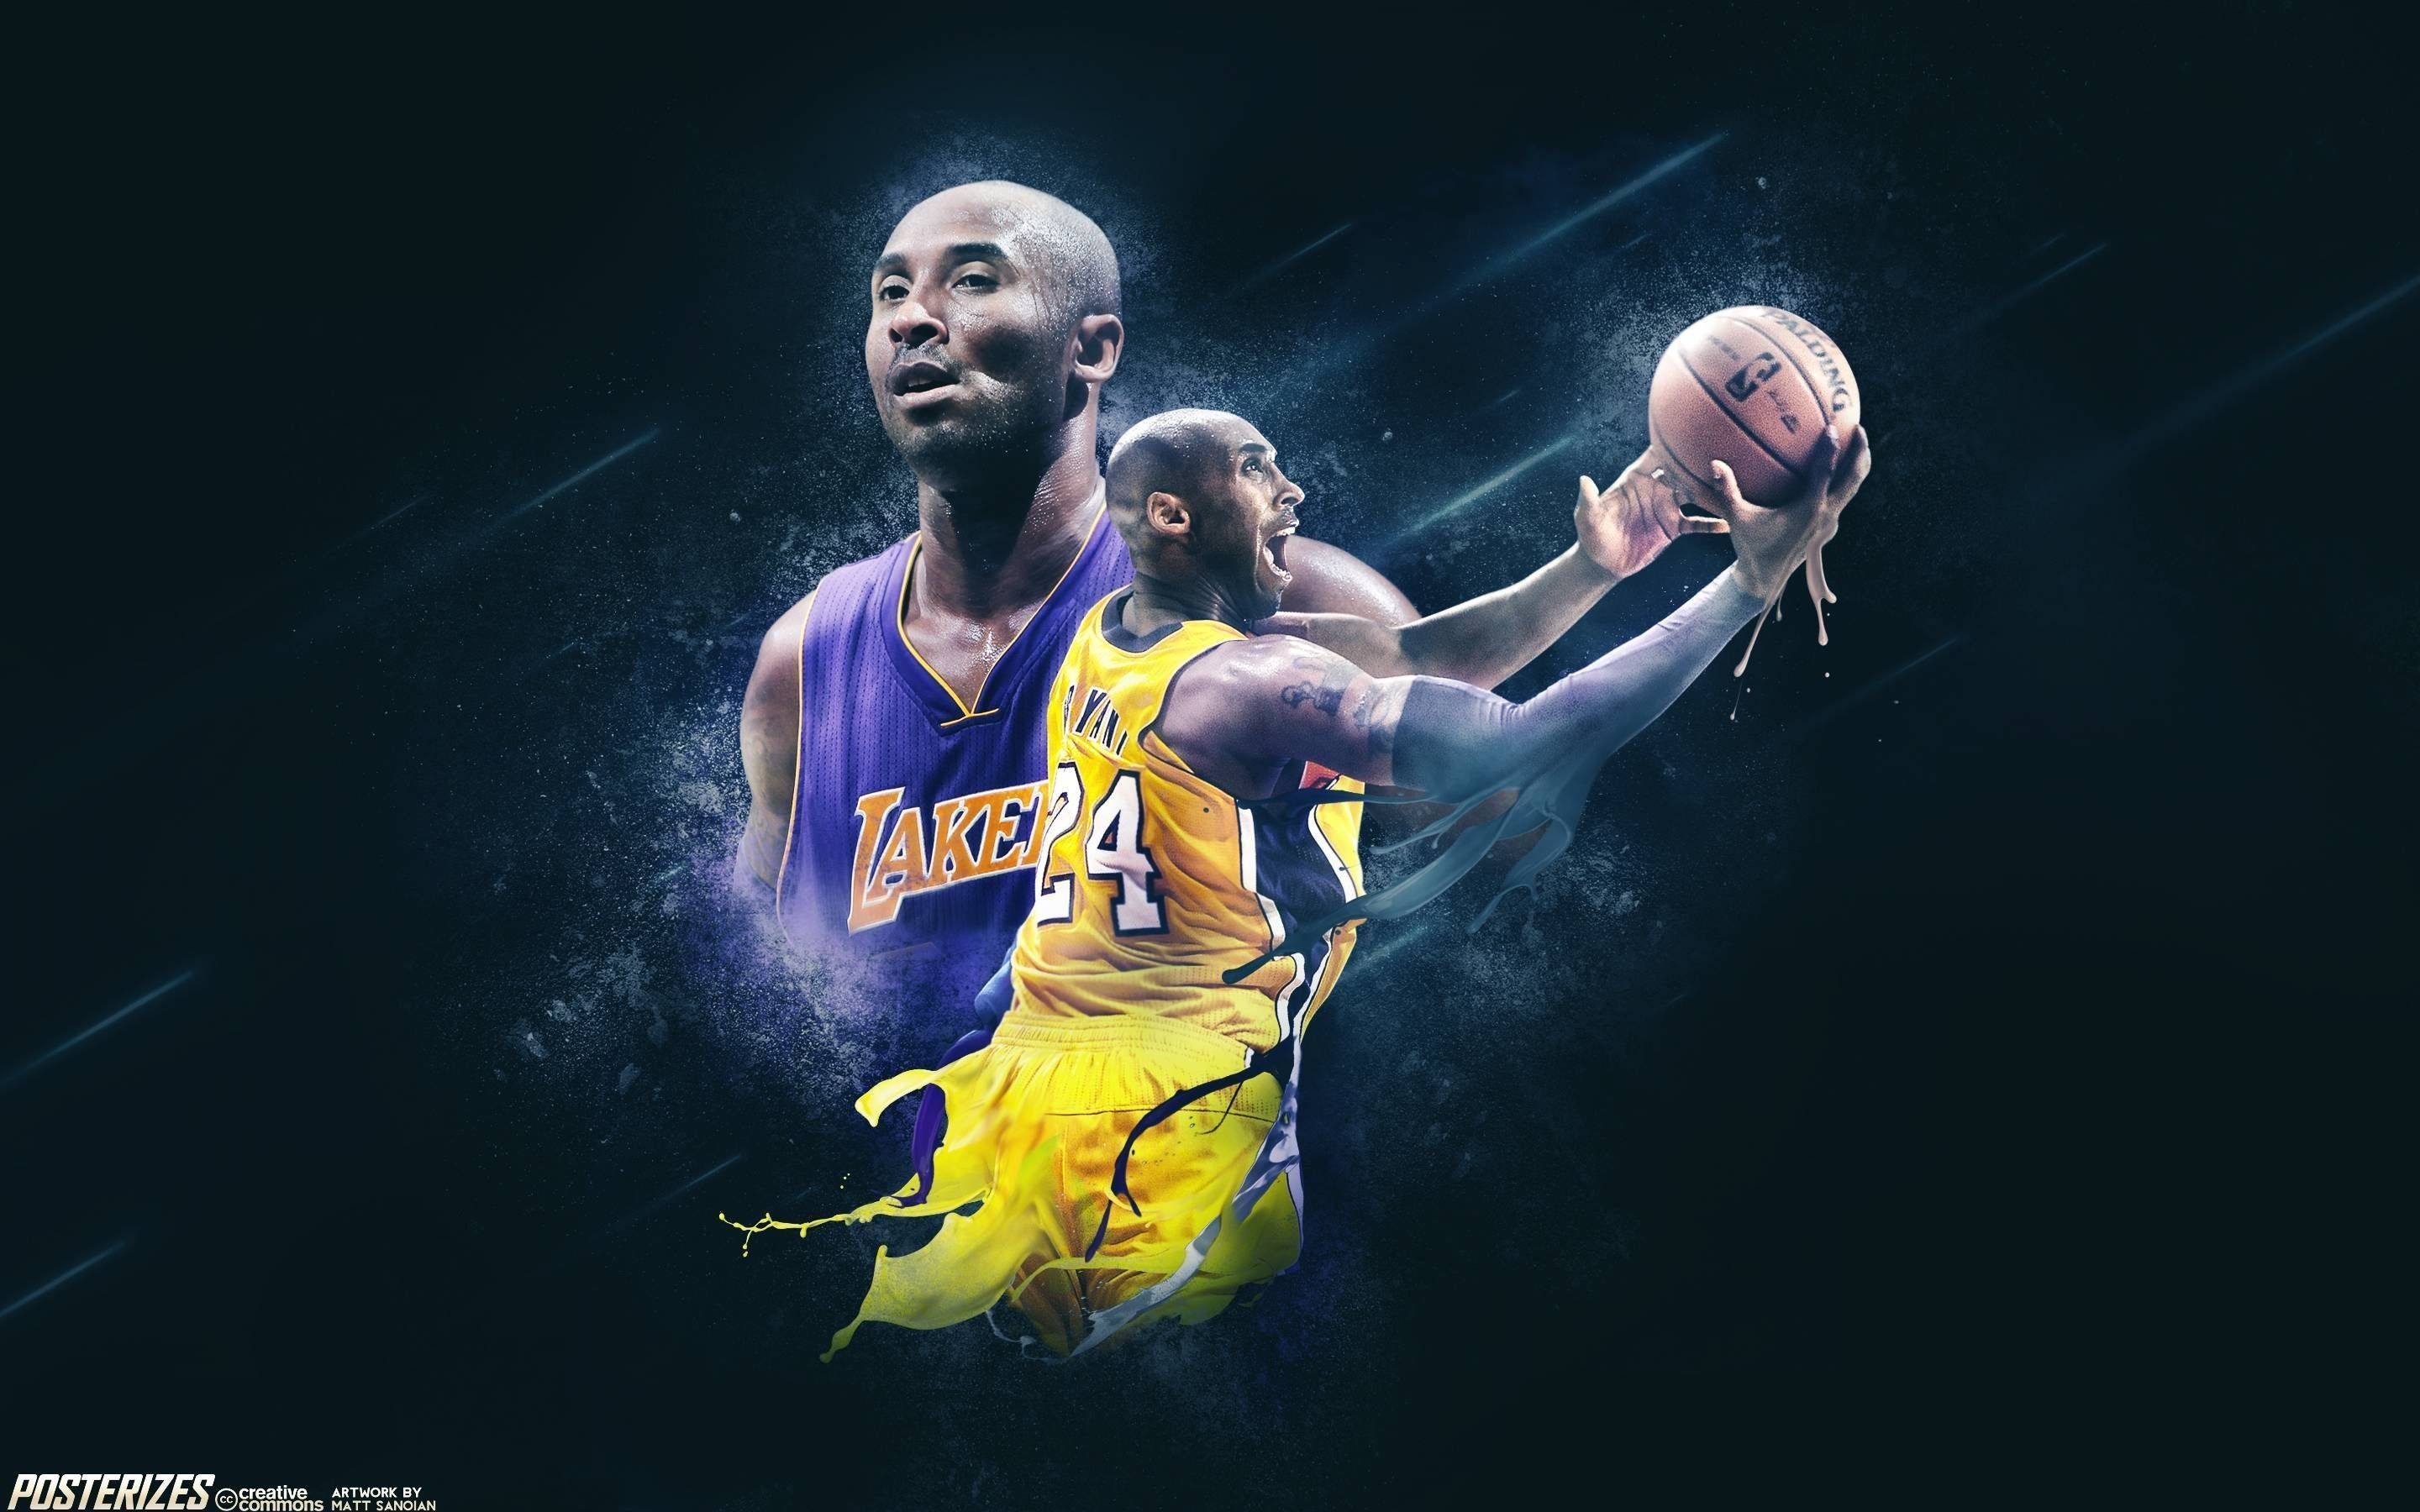 Kobe Bryant wallpaper featuring the Lakers star in action on the court. - Kobe Bryant